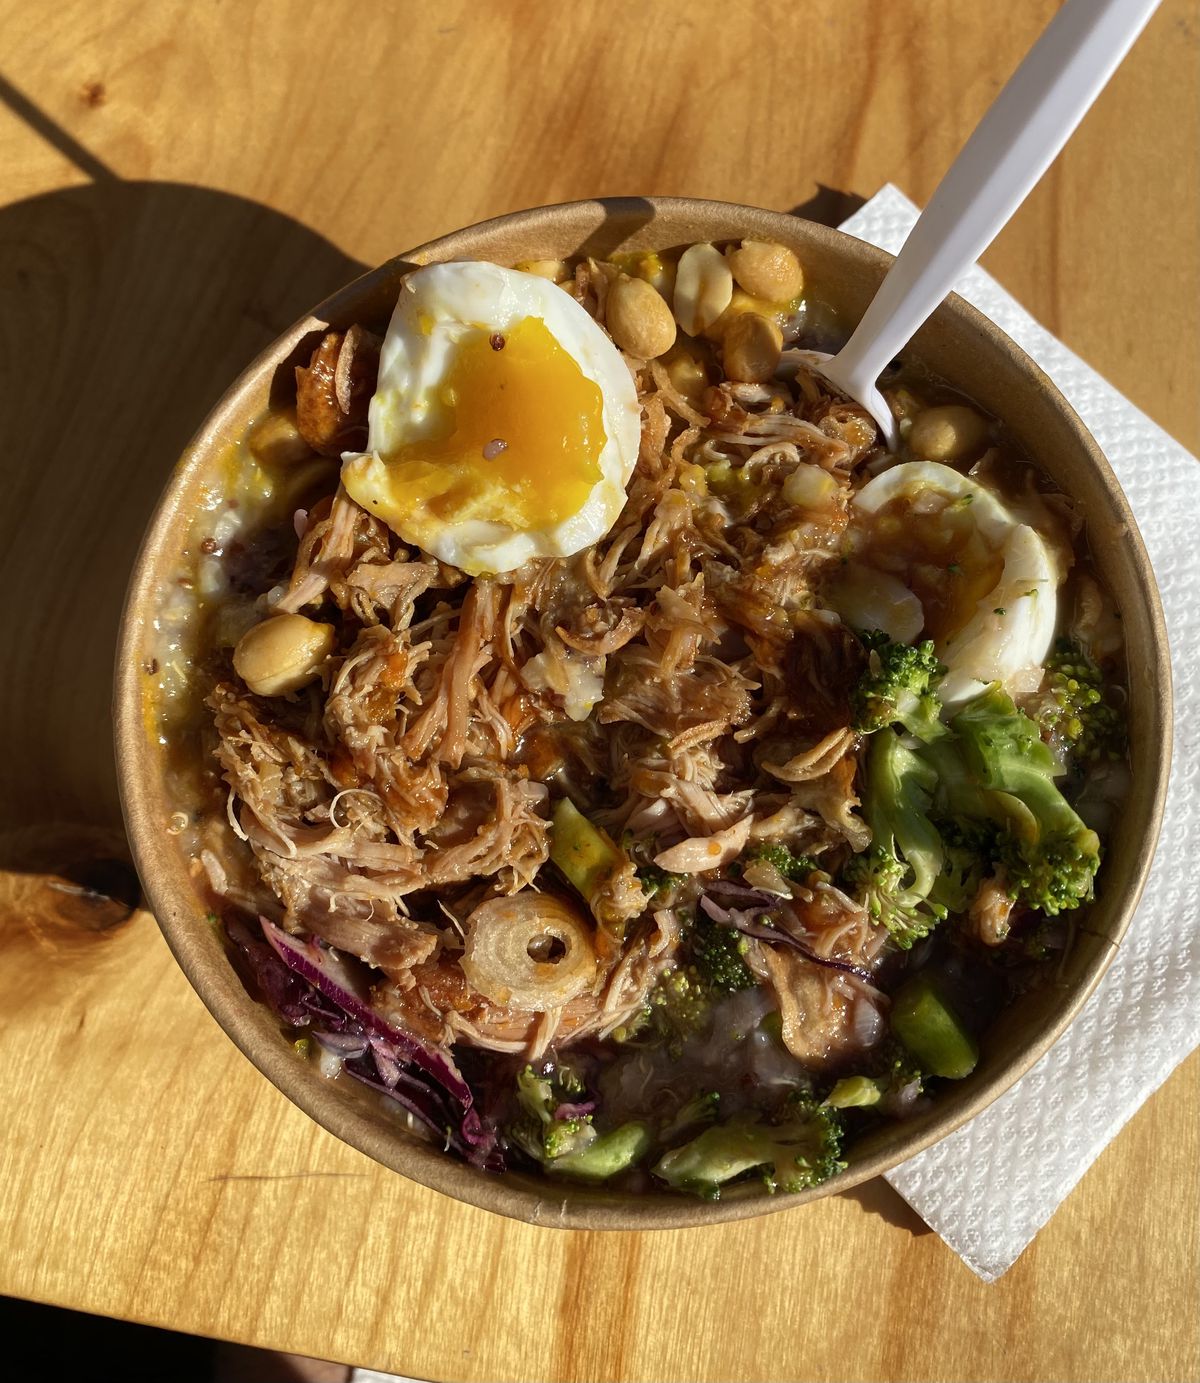 An overhead photograph of a bowl of congee, filled with soft-boiled egg, pulled chicken, broccoli, peanuts, and other ingredients